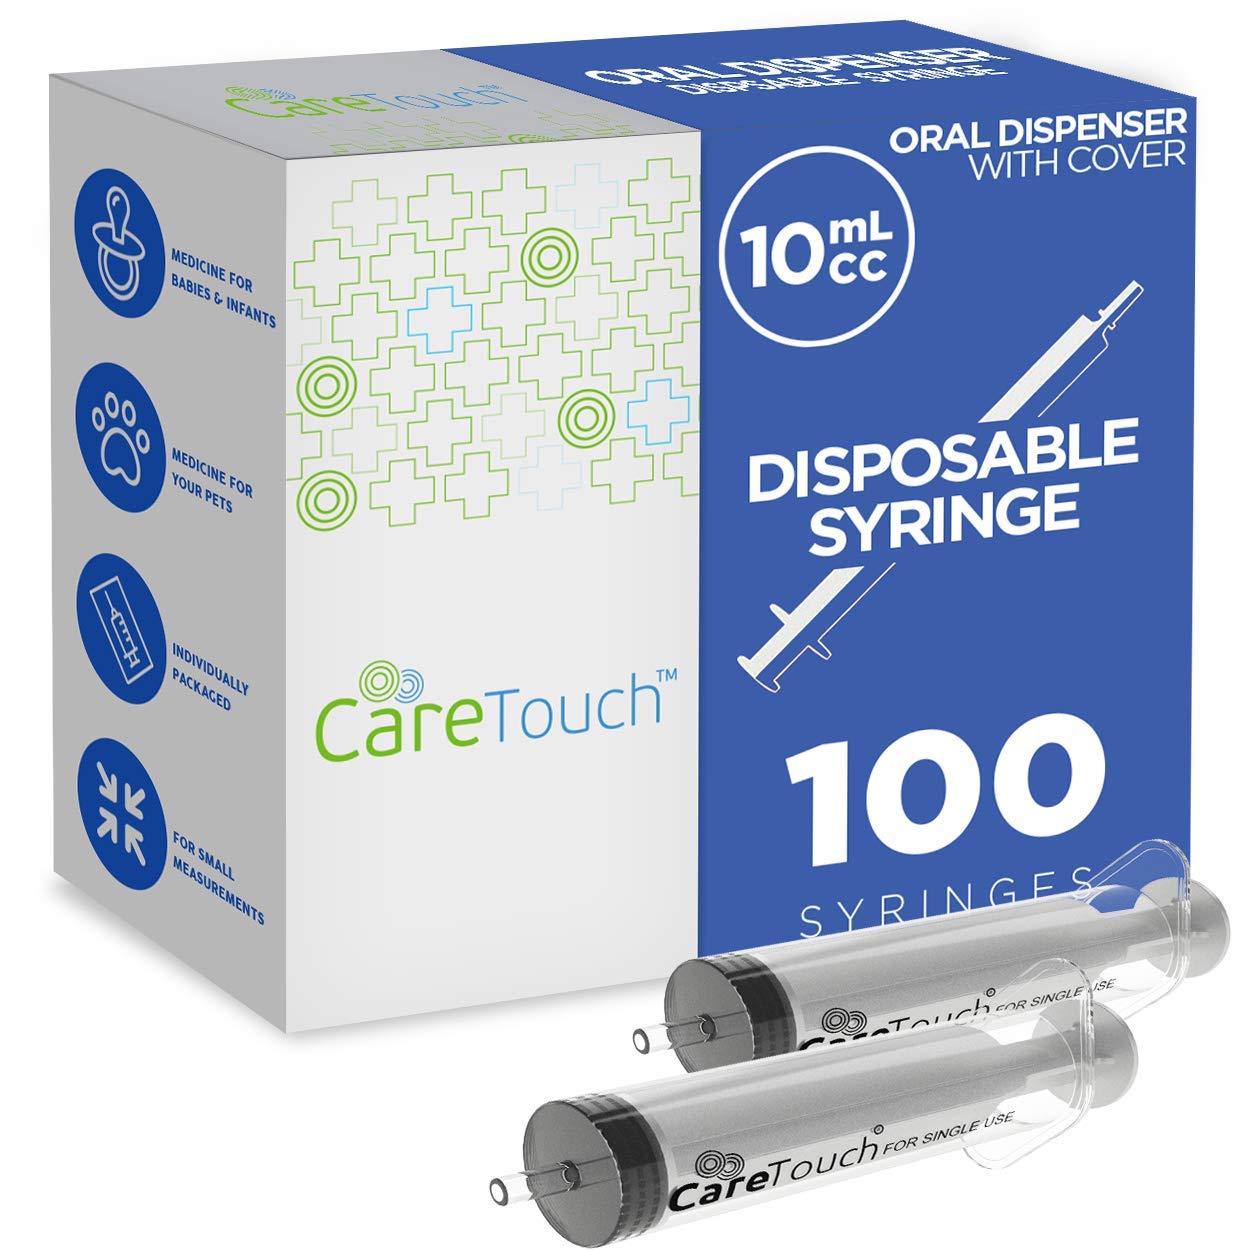 Care Touch Syringes Oral Tip 10ml (Case of 6 units) (Discontinued)